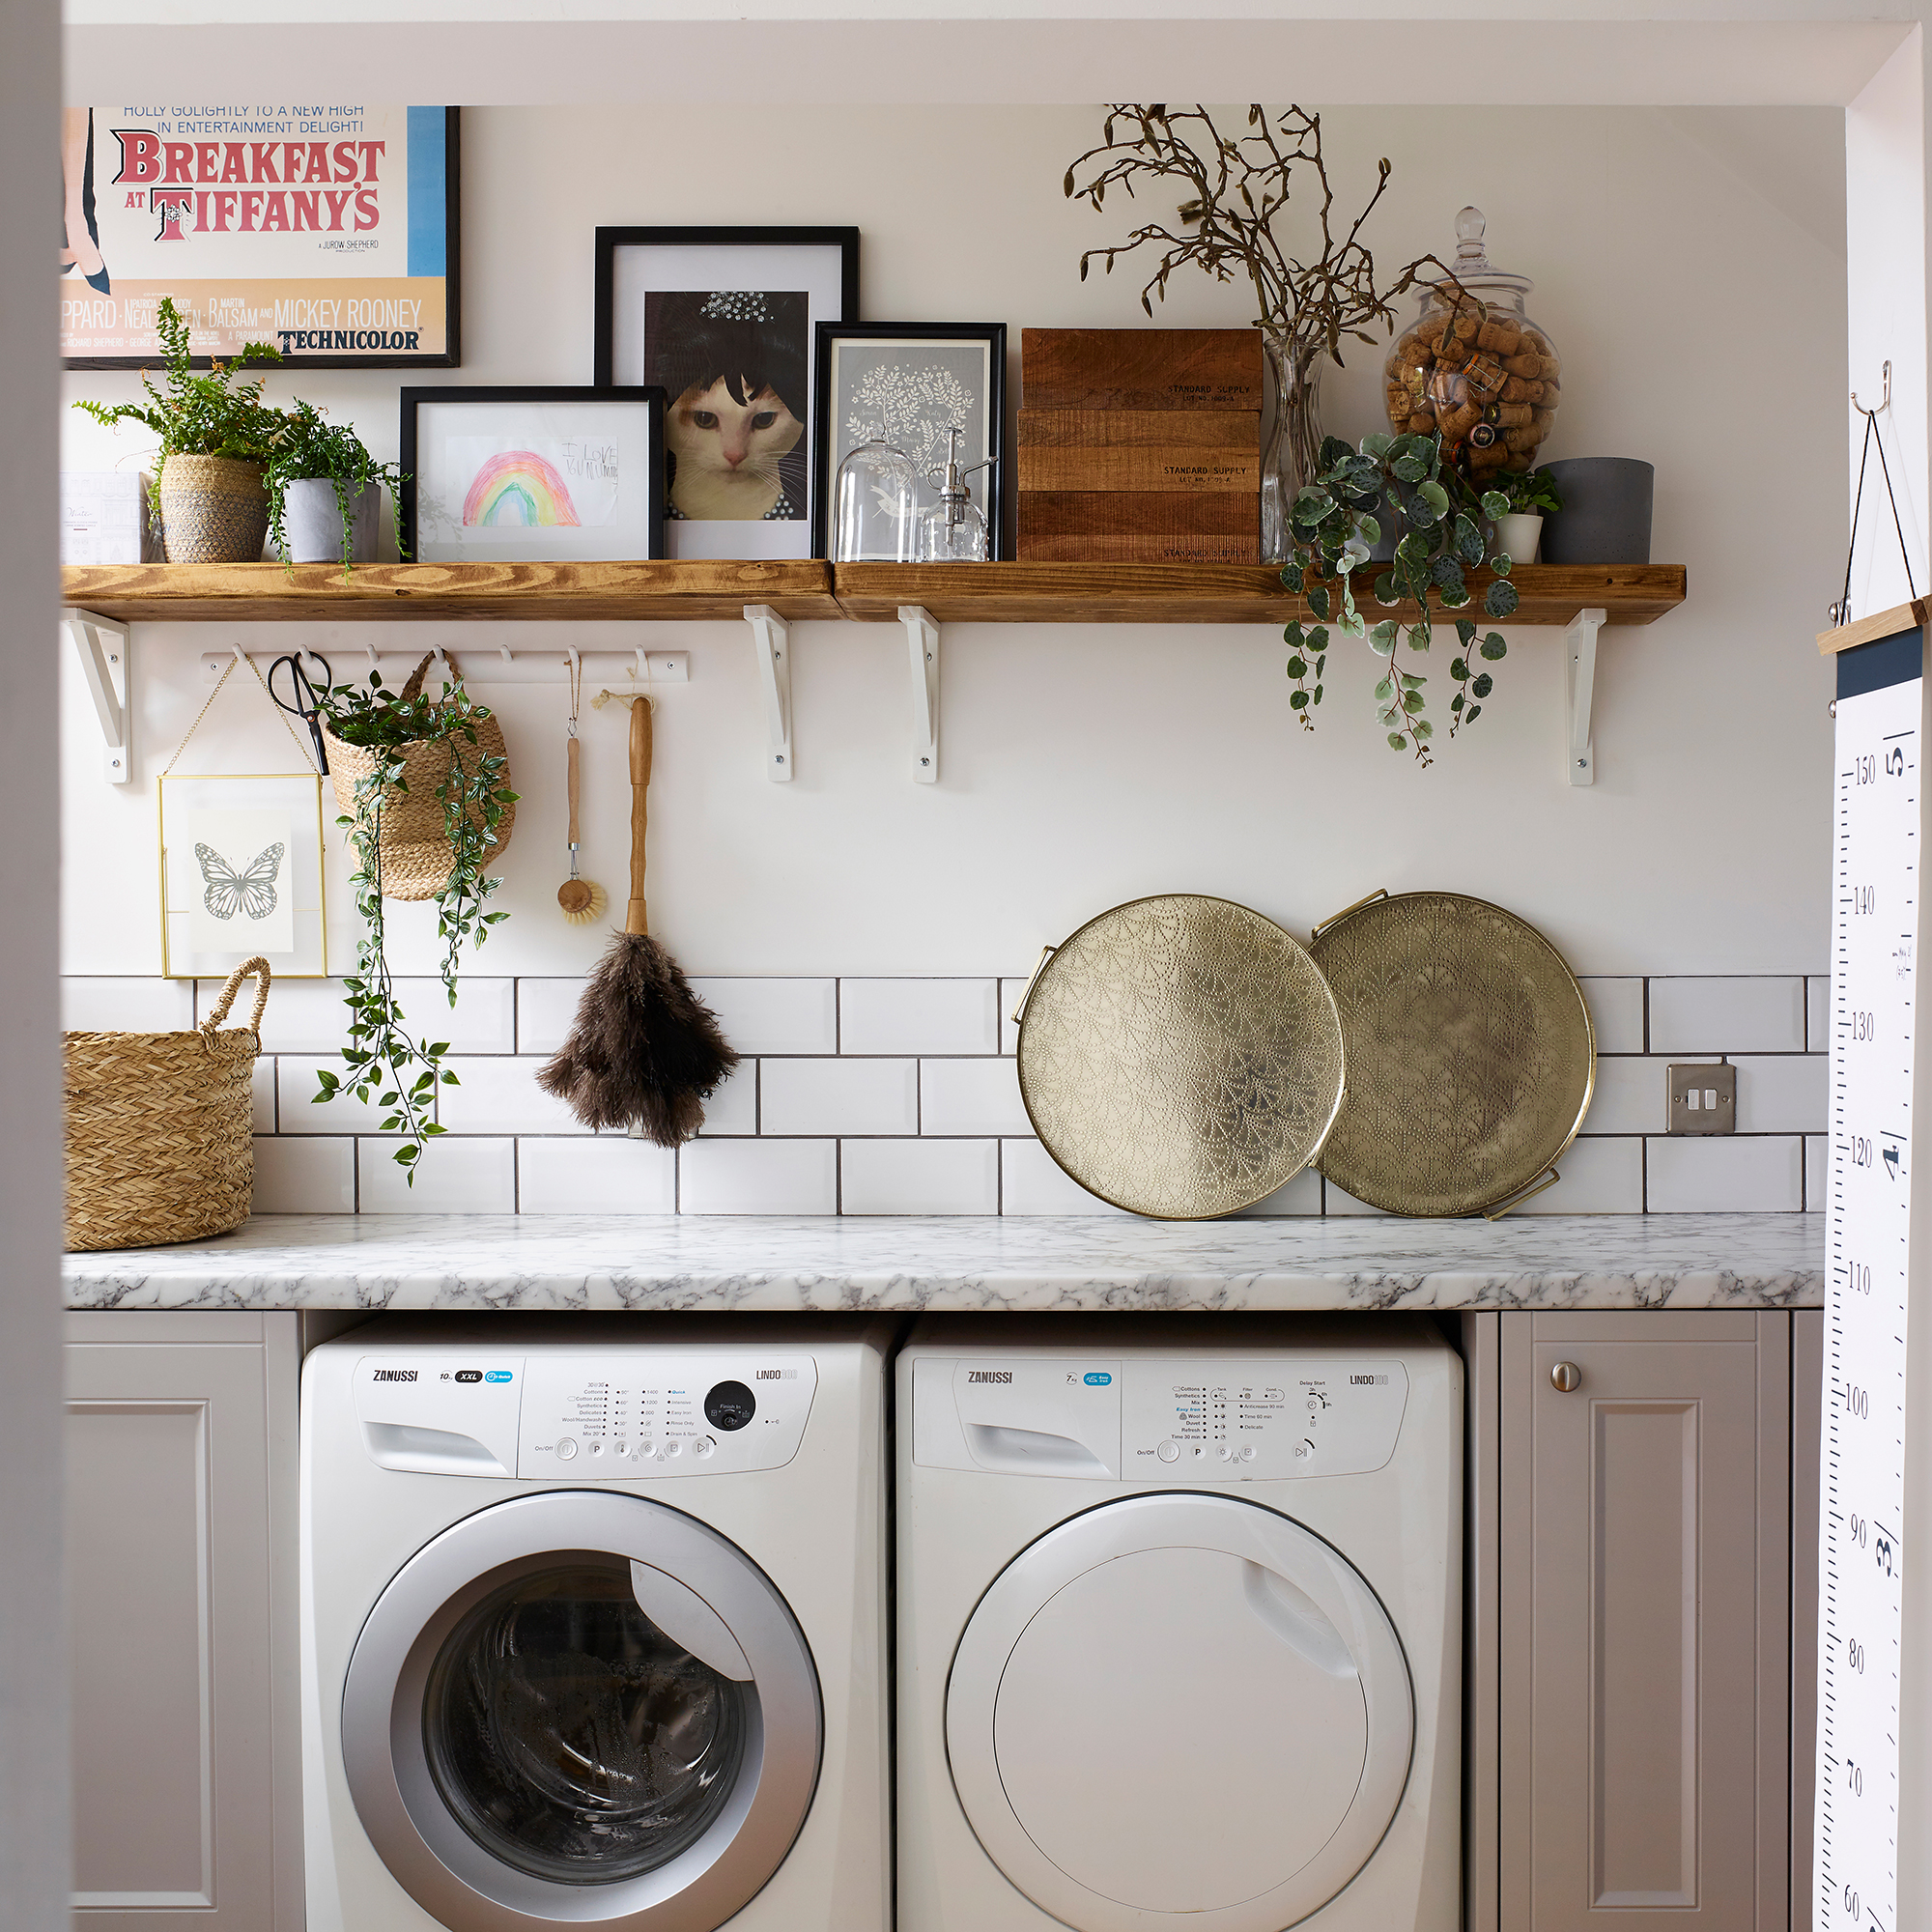 Laundry room with metro tiling, marble worktops and styled shelving